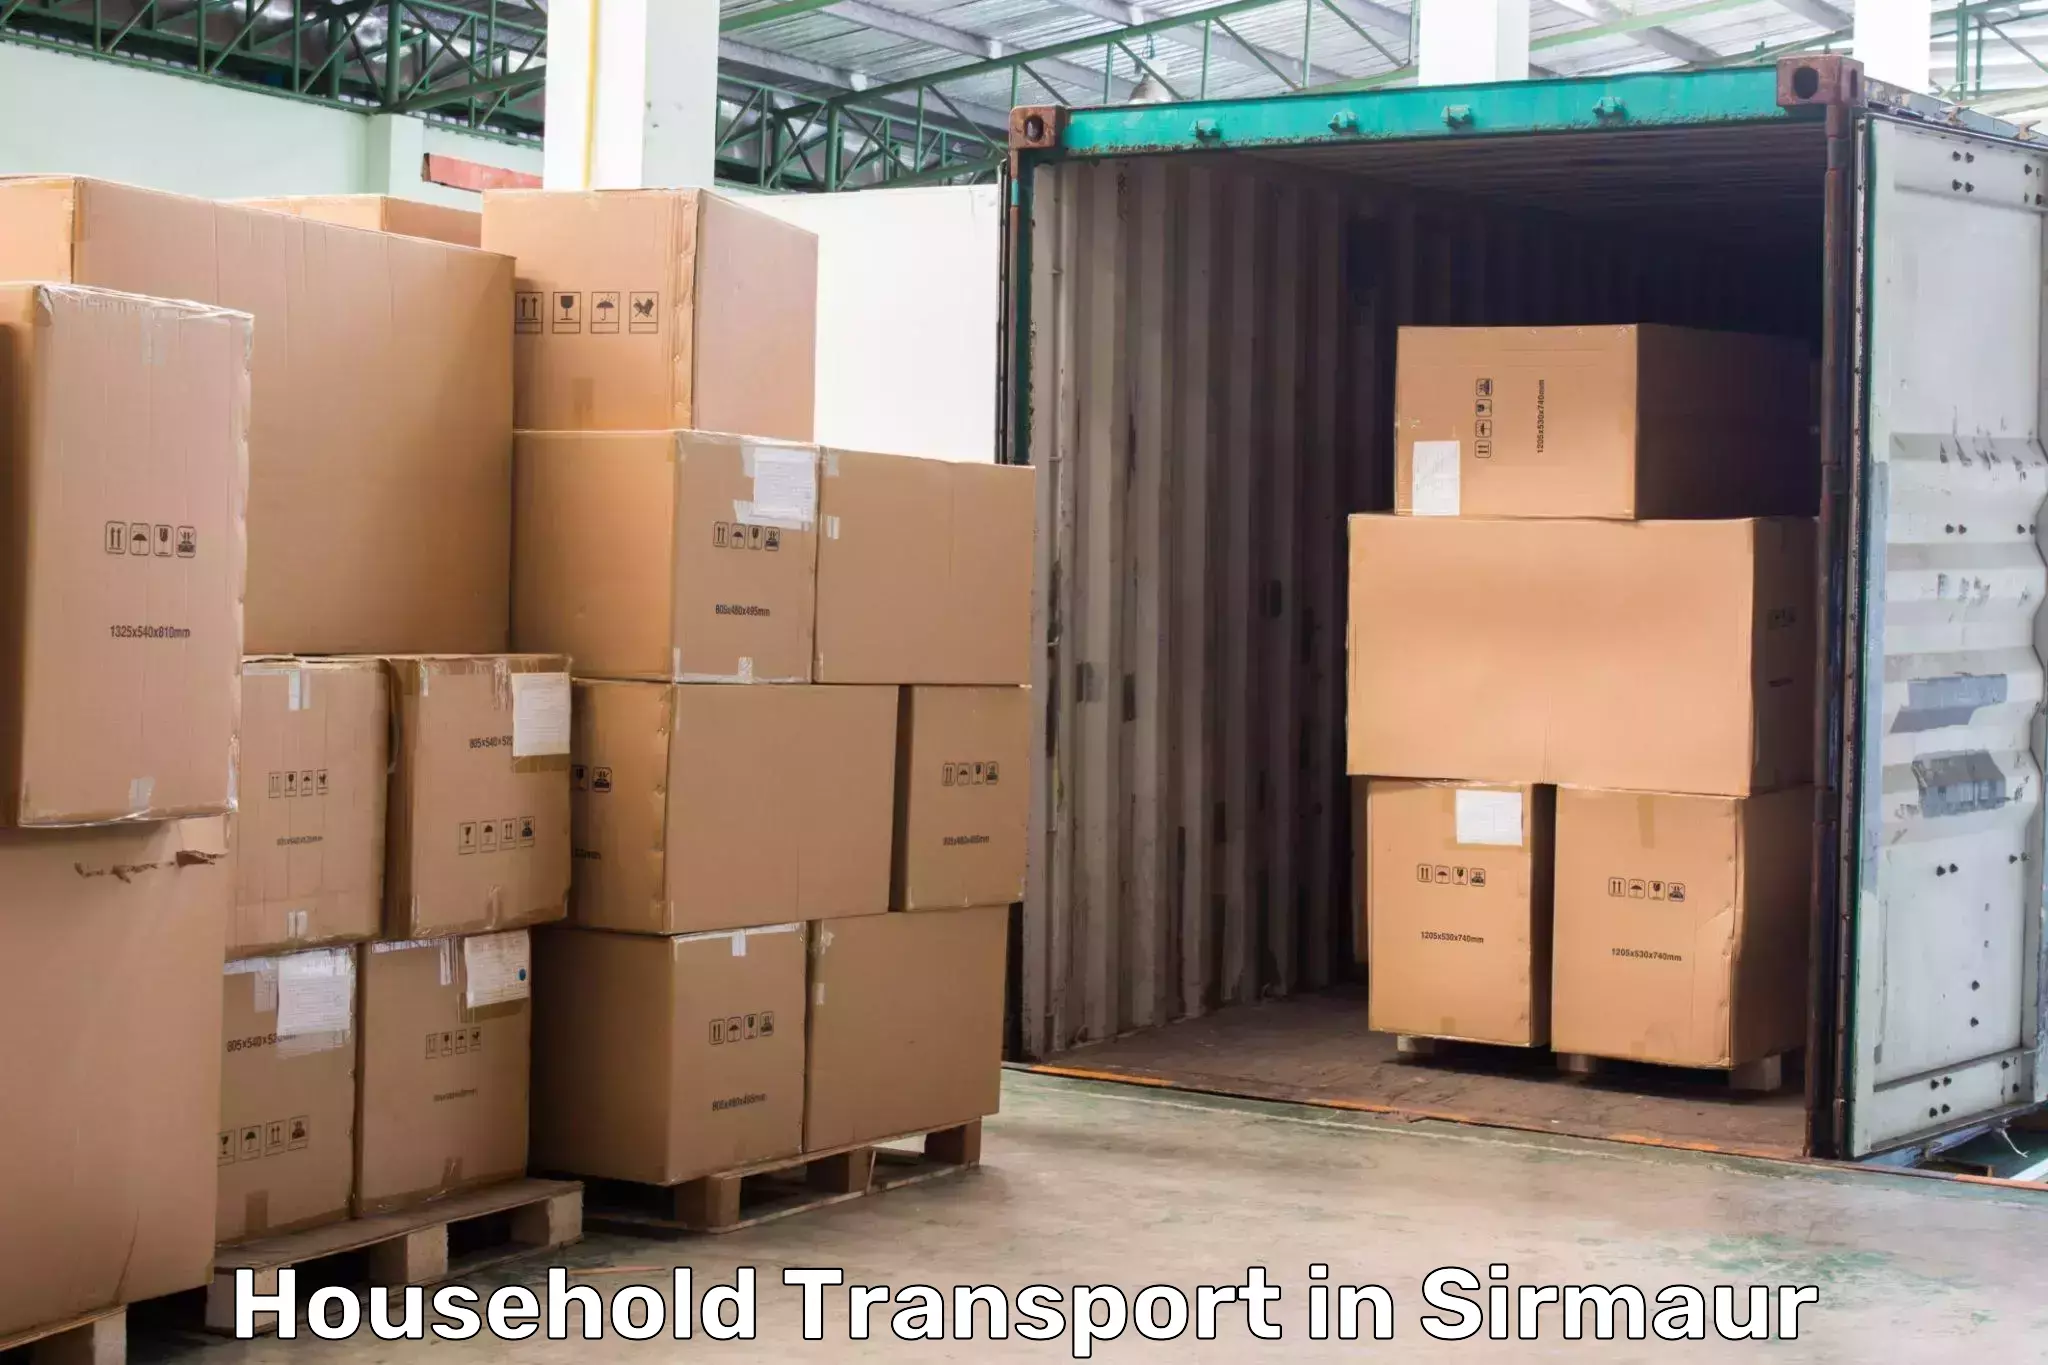 Specialized household transport in Sirmaur